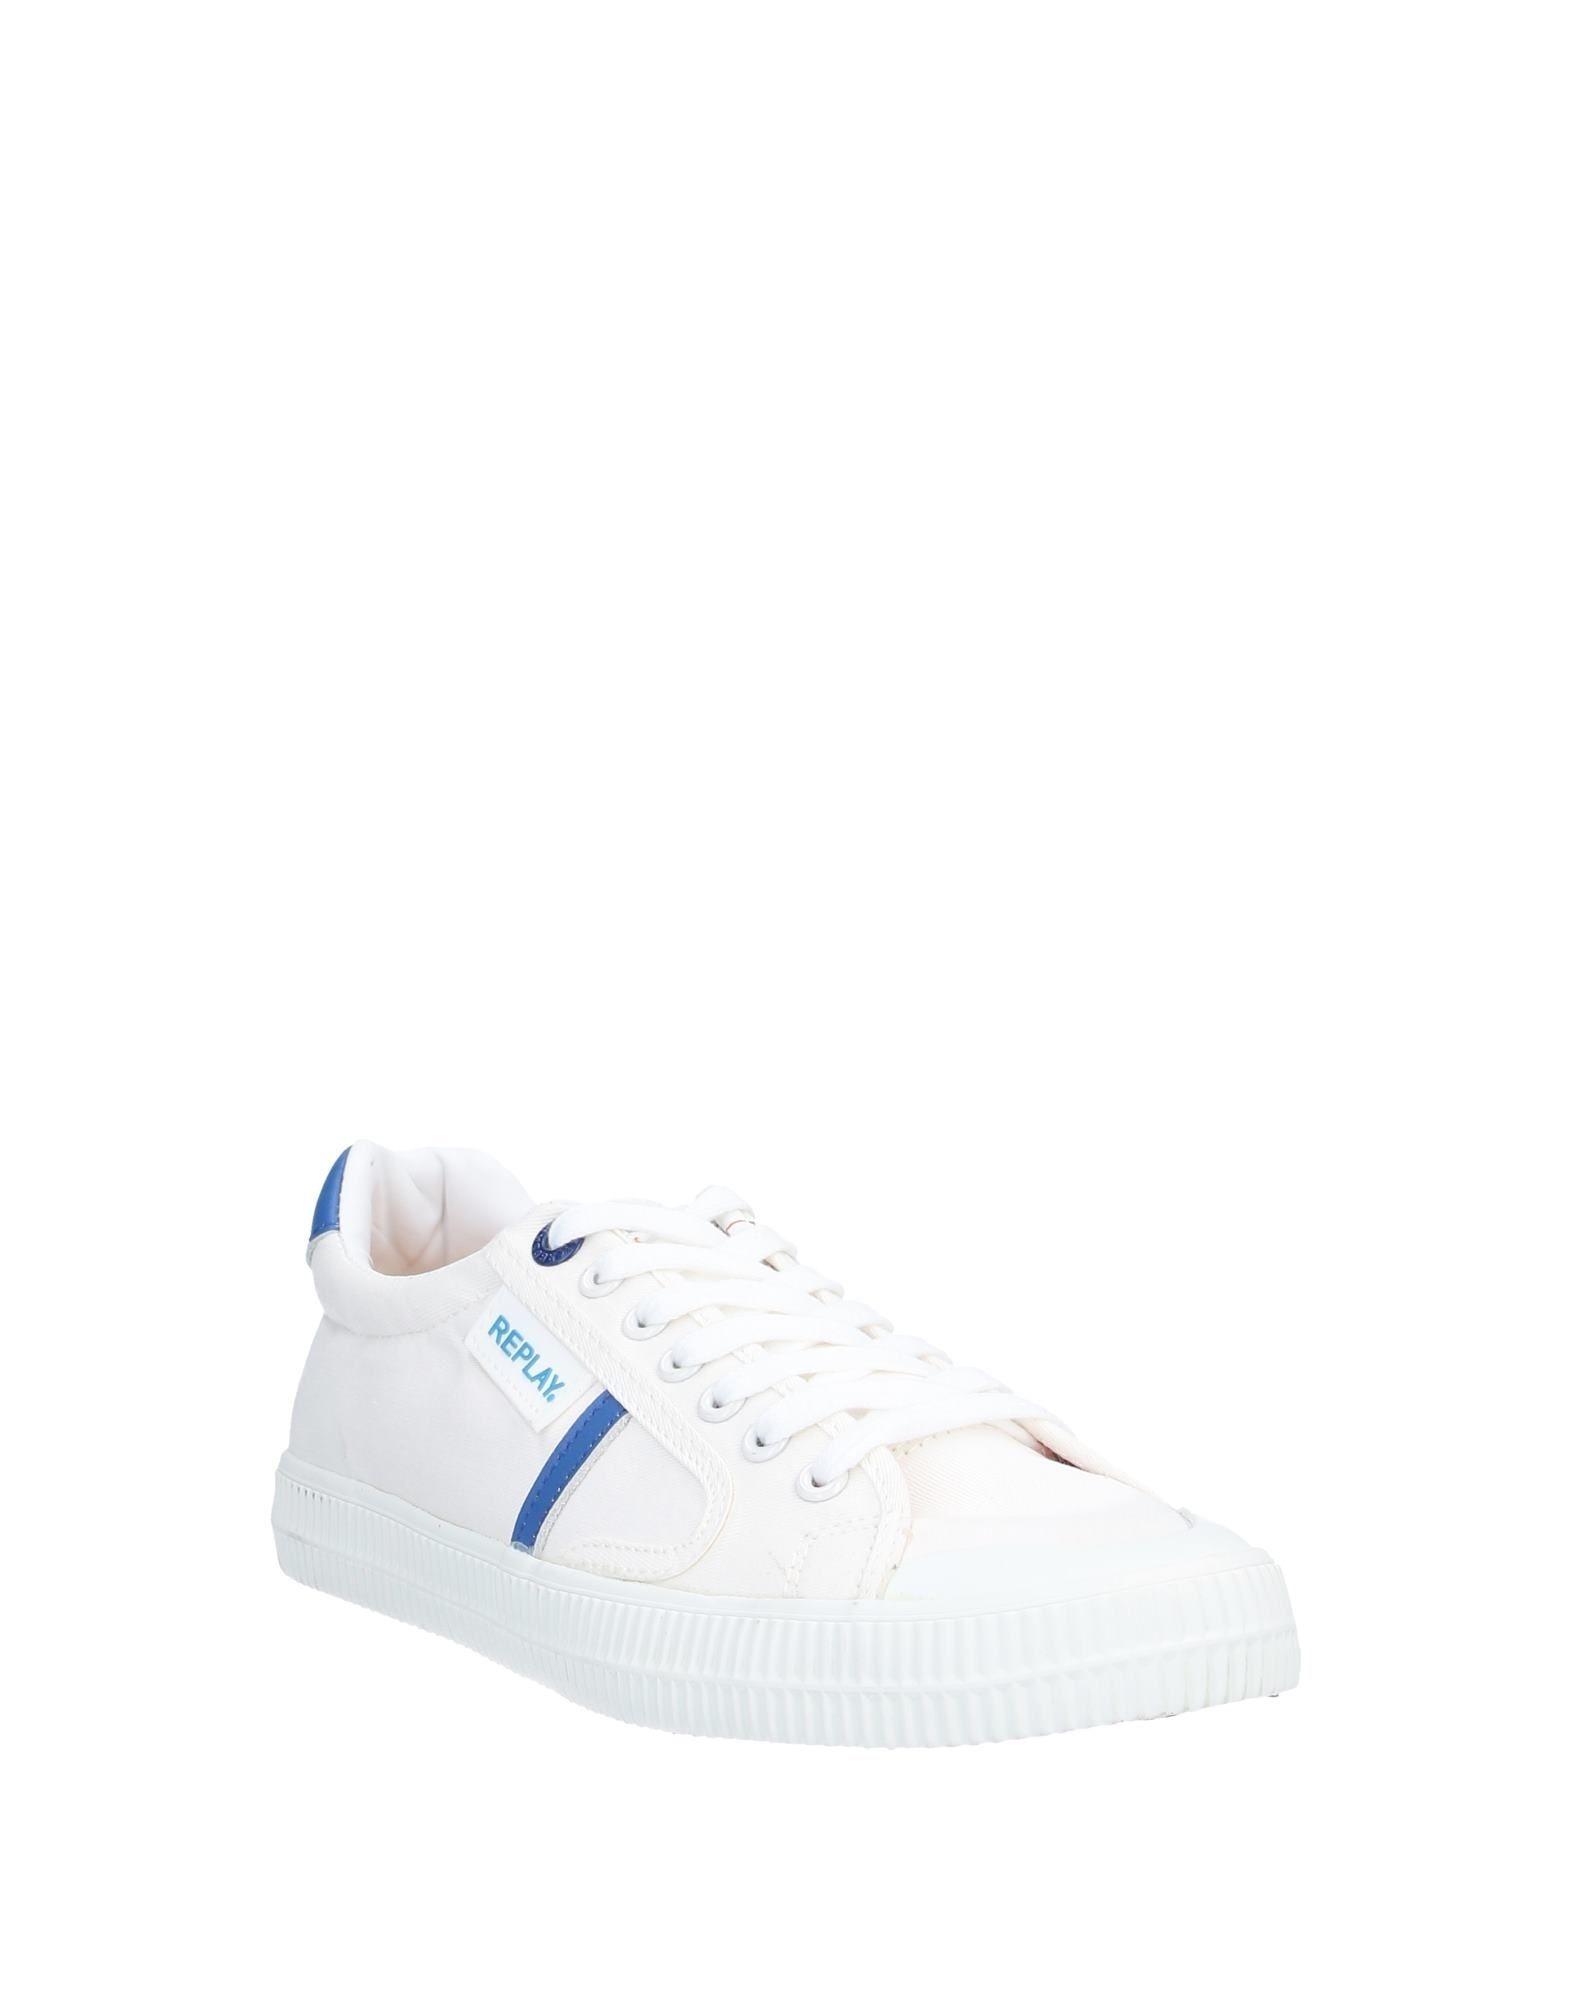 Replay Rubber Low-tops & Sneakers in White for Men - Lyst